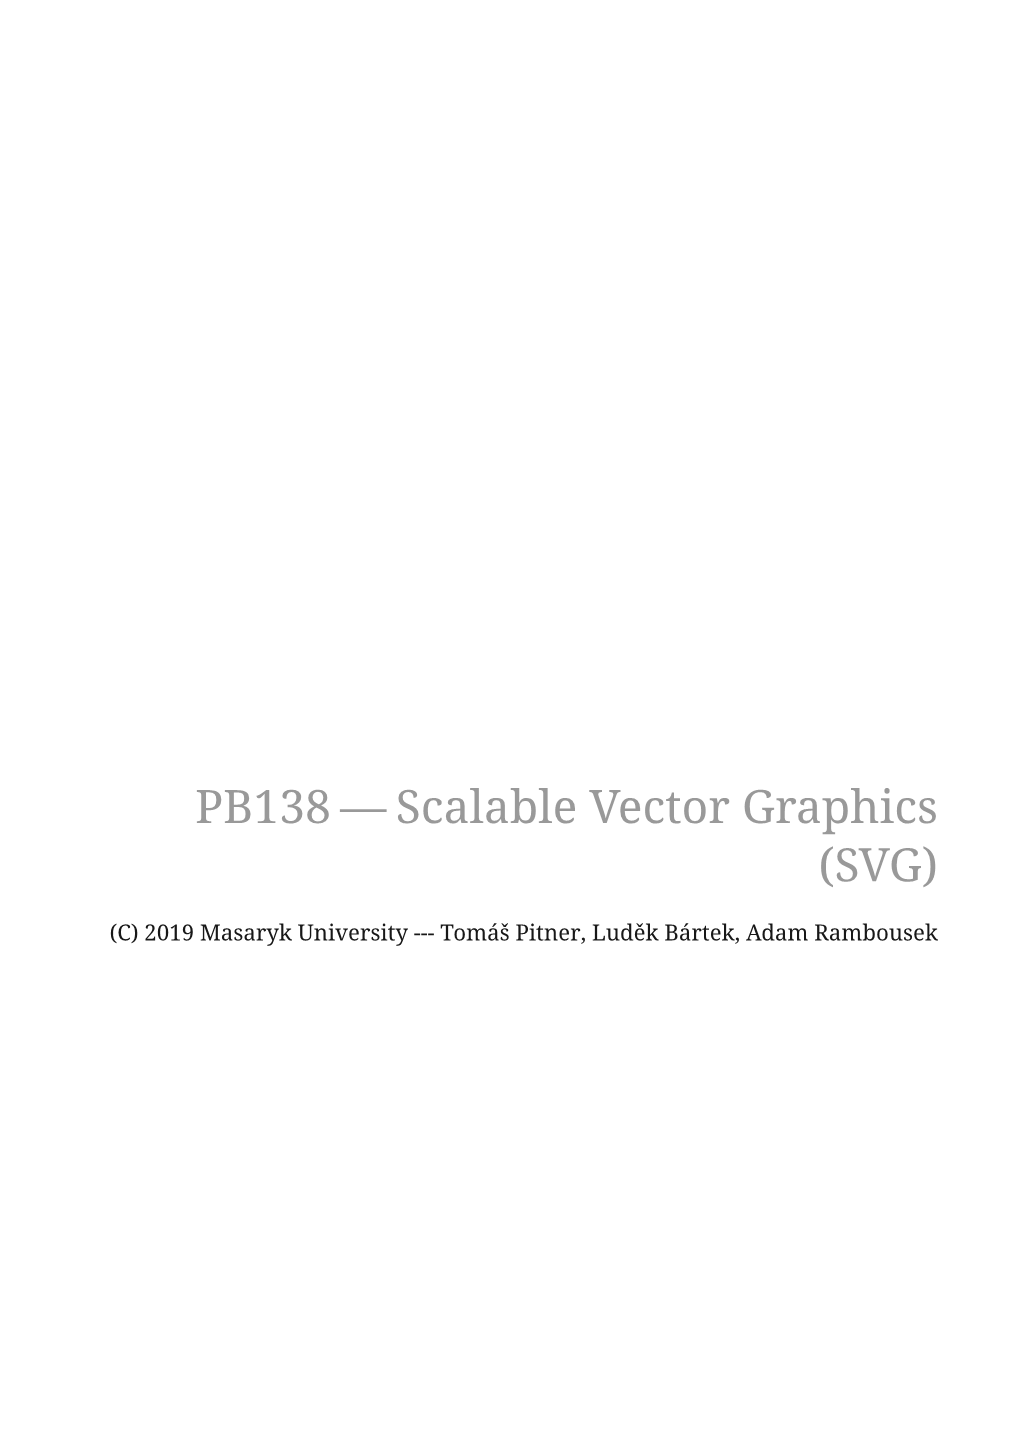 PB138 — Scalable Vector Graphics (SVG)